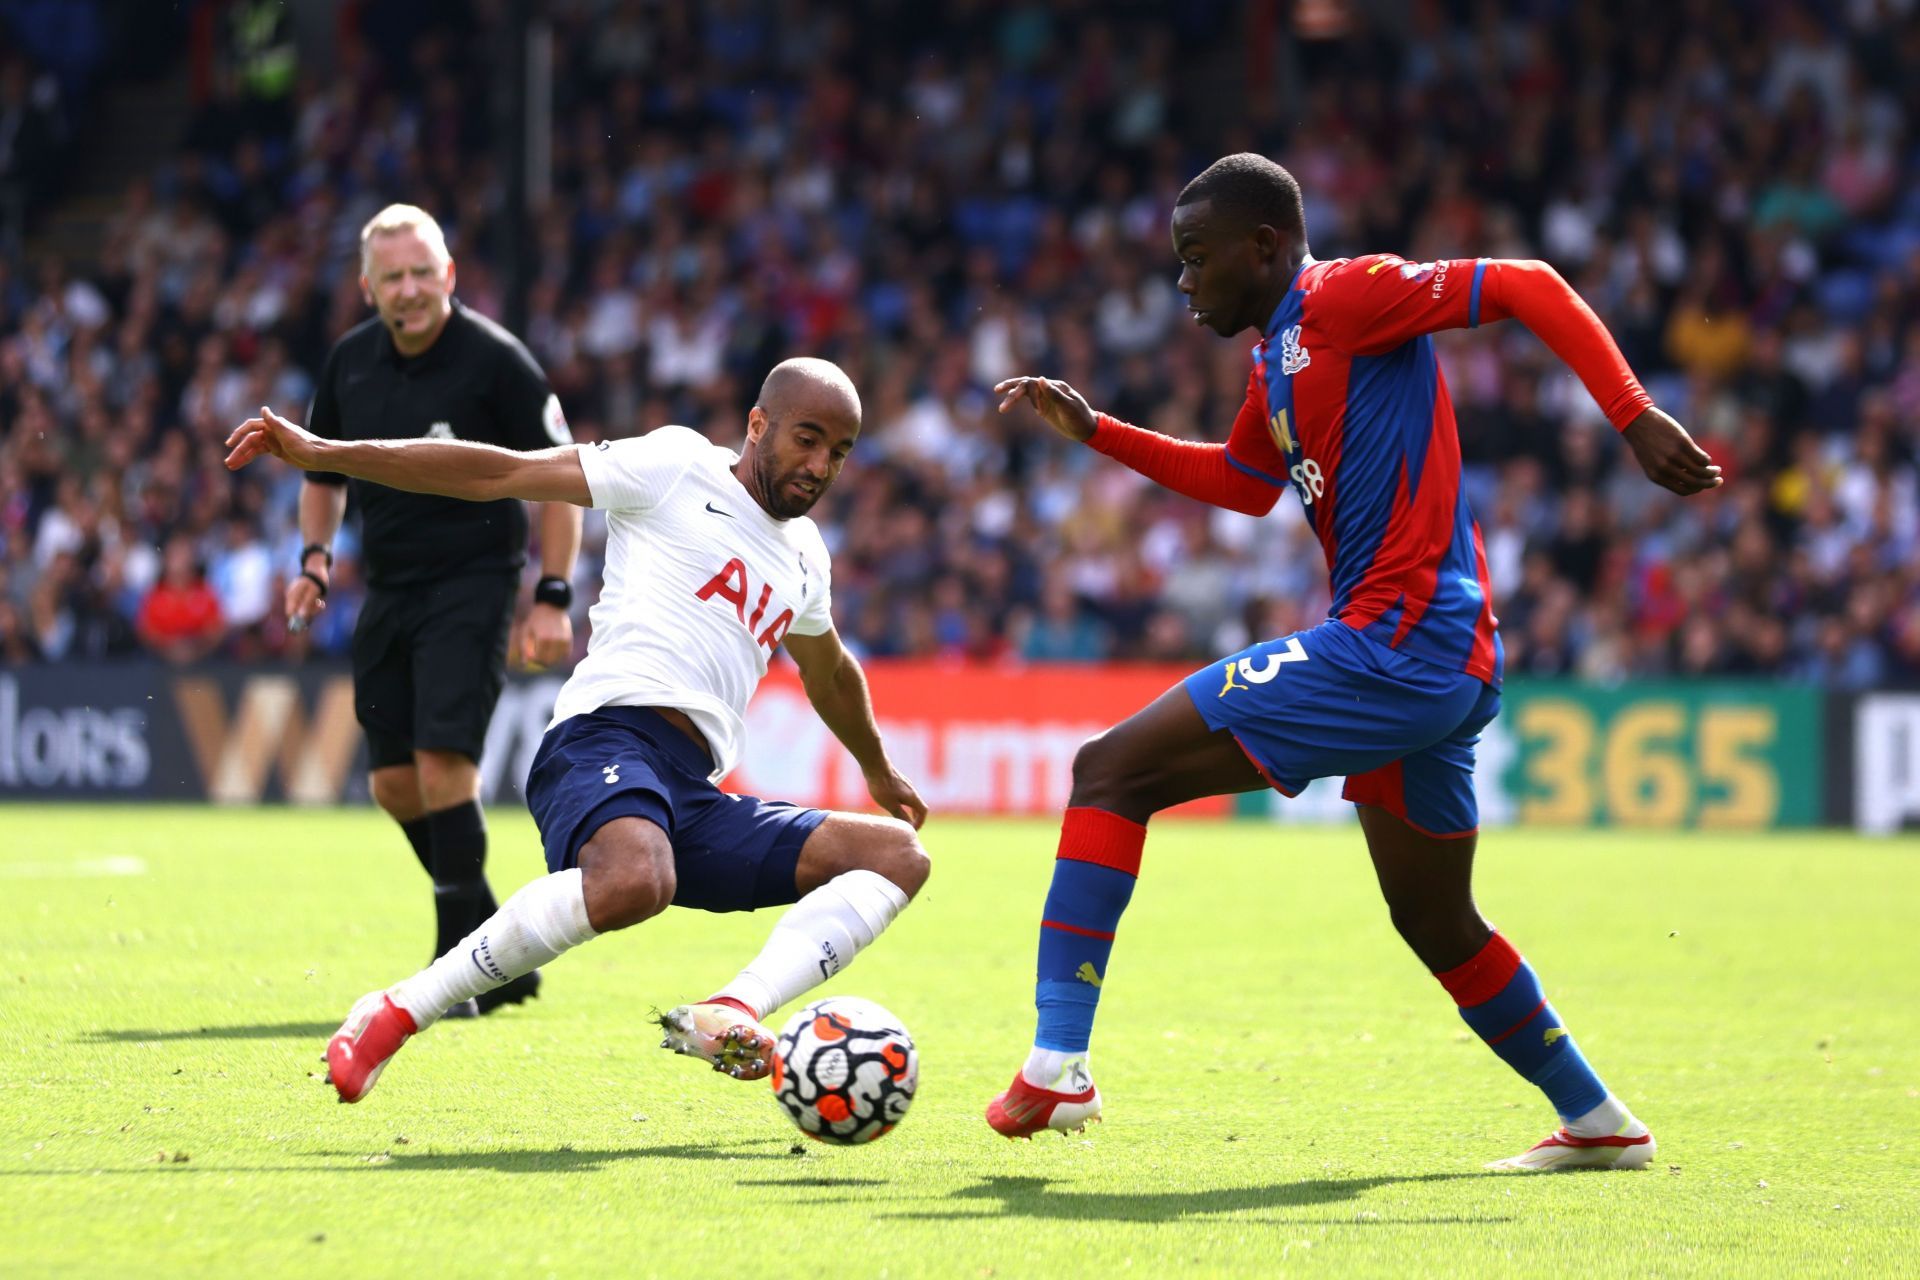 Crystal Palace are looking to win consecutively against Tottenham Hotspur for the first time